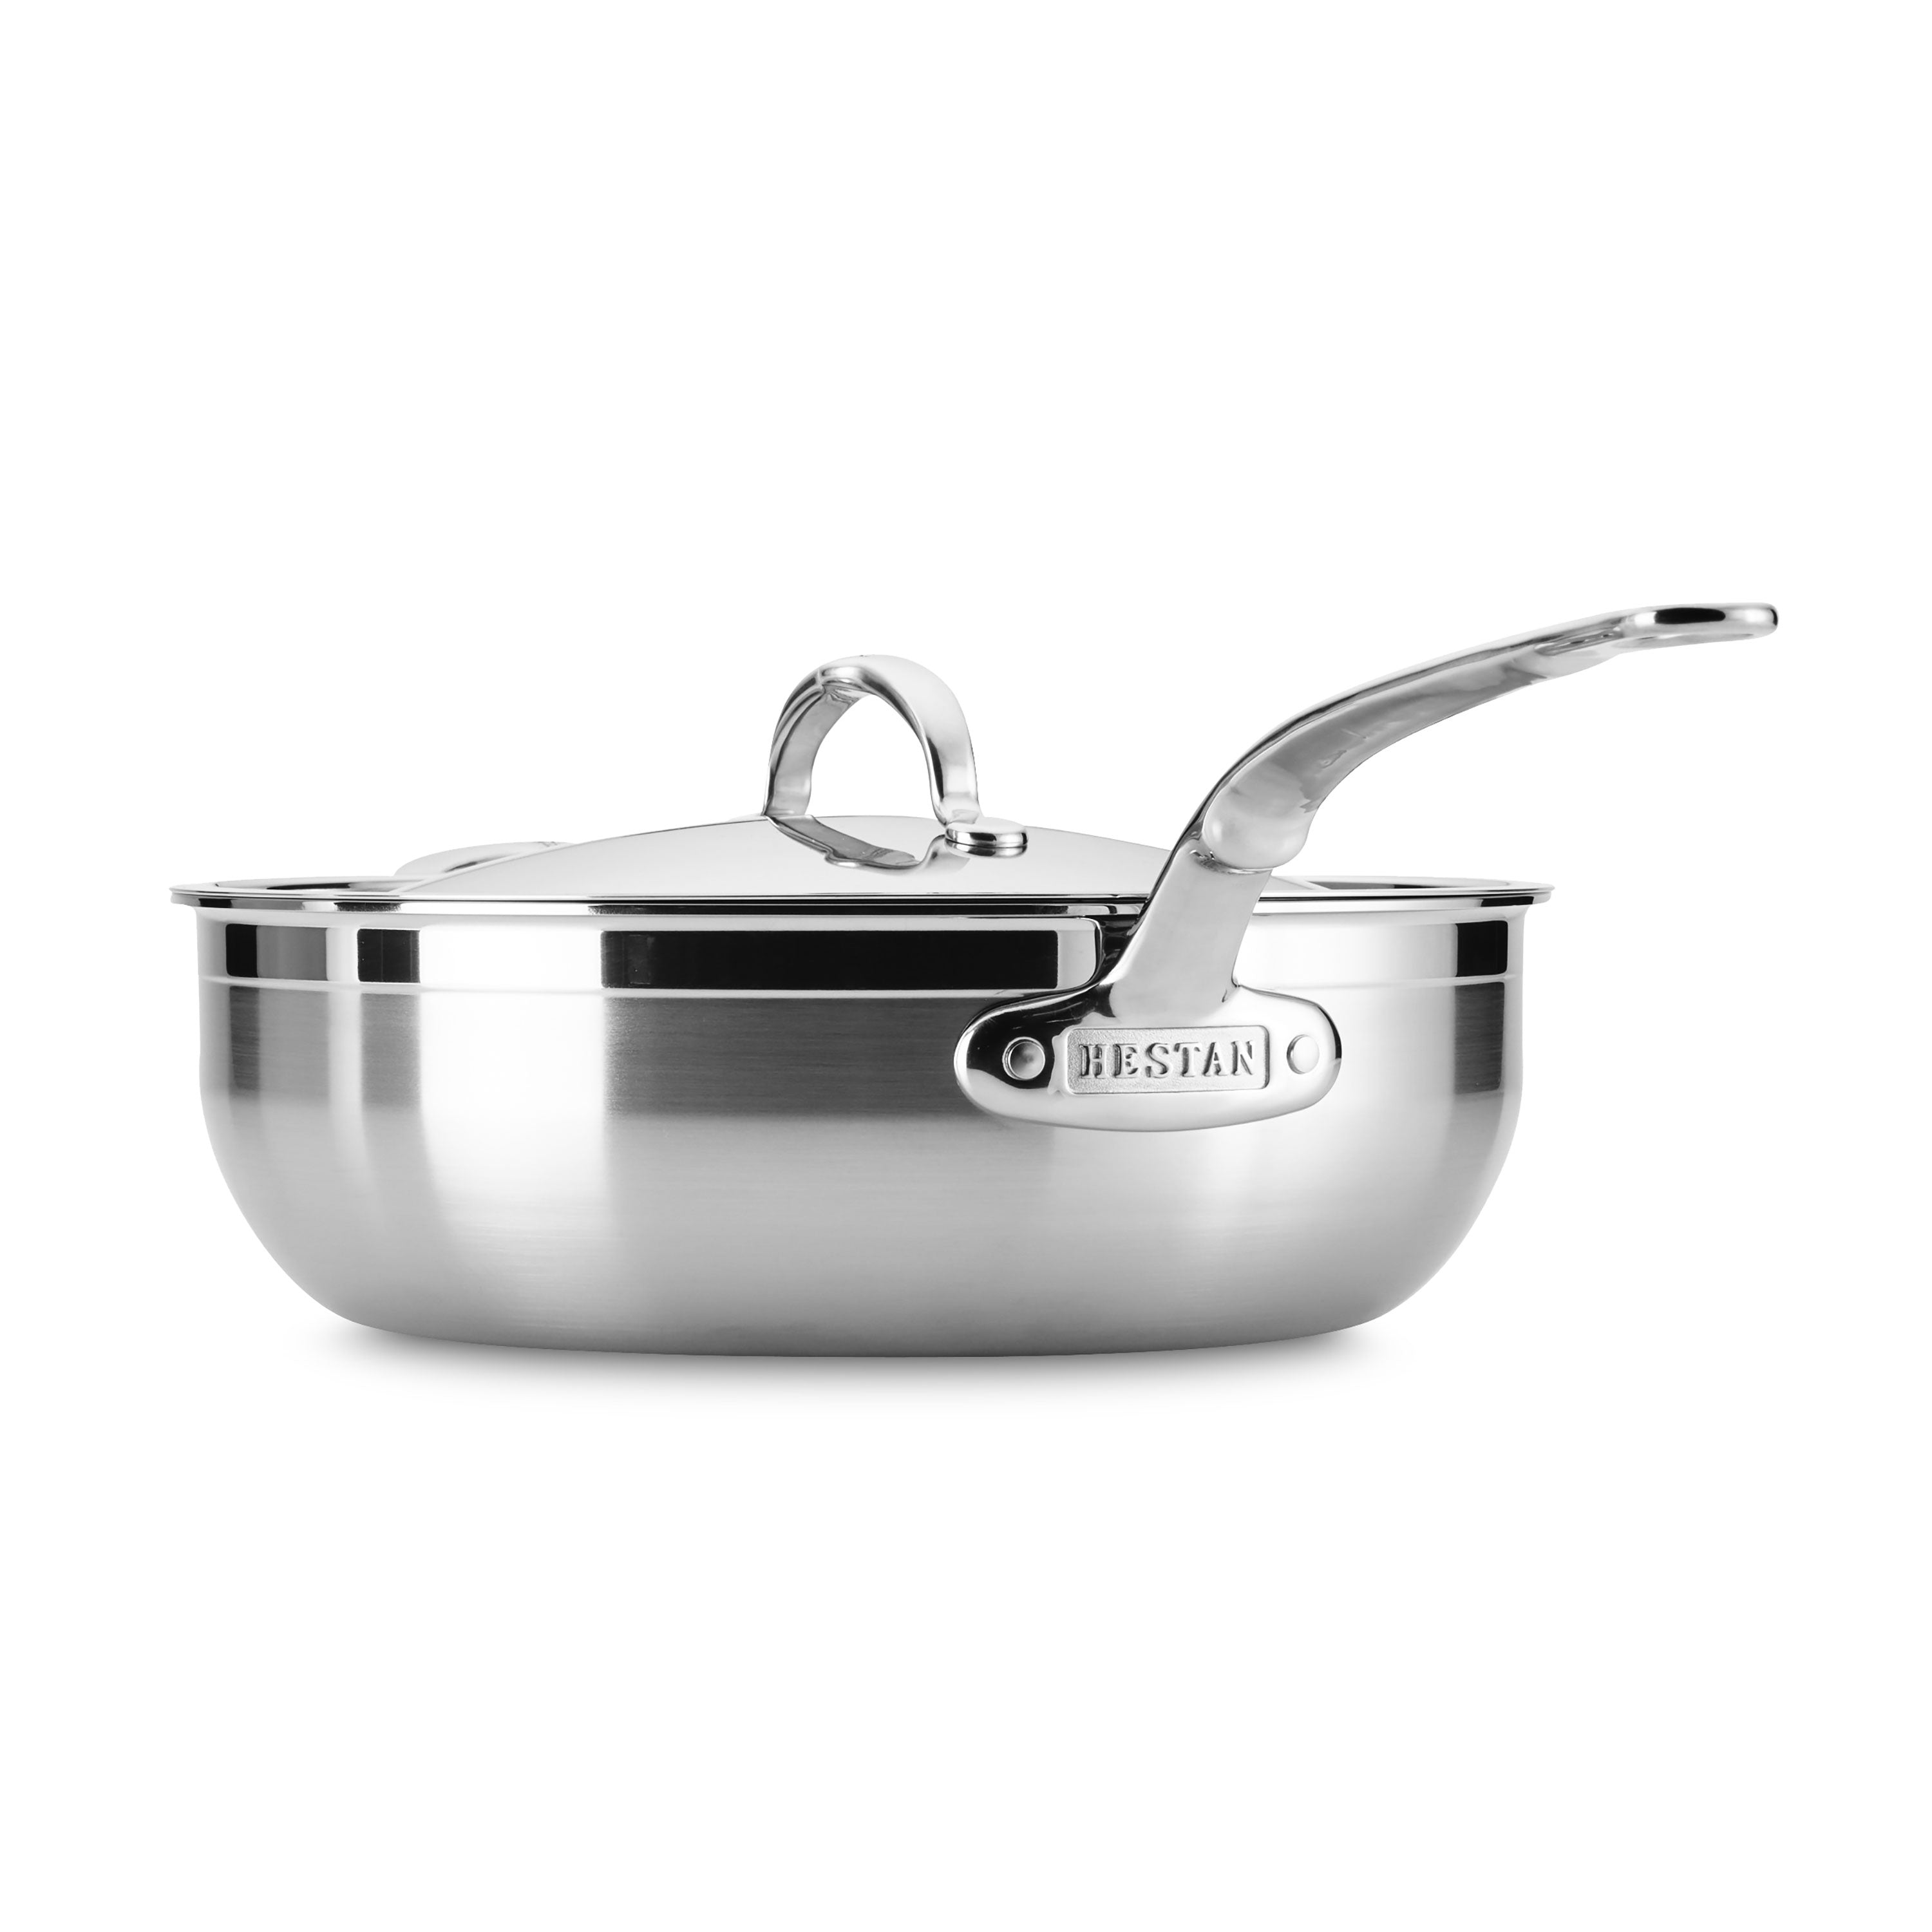 Hestan ProBond Essential Pan - 5-quart Stainless Steel – Cutlery and More